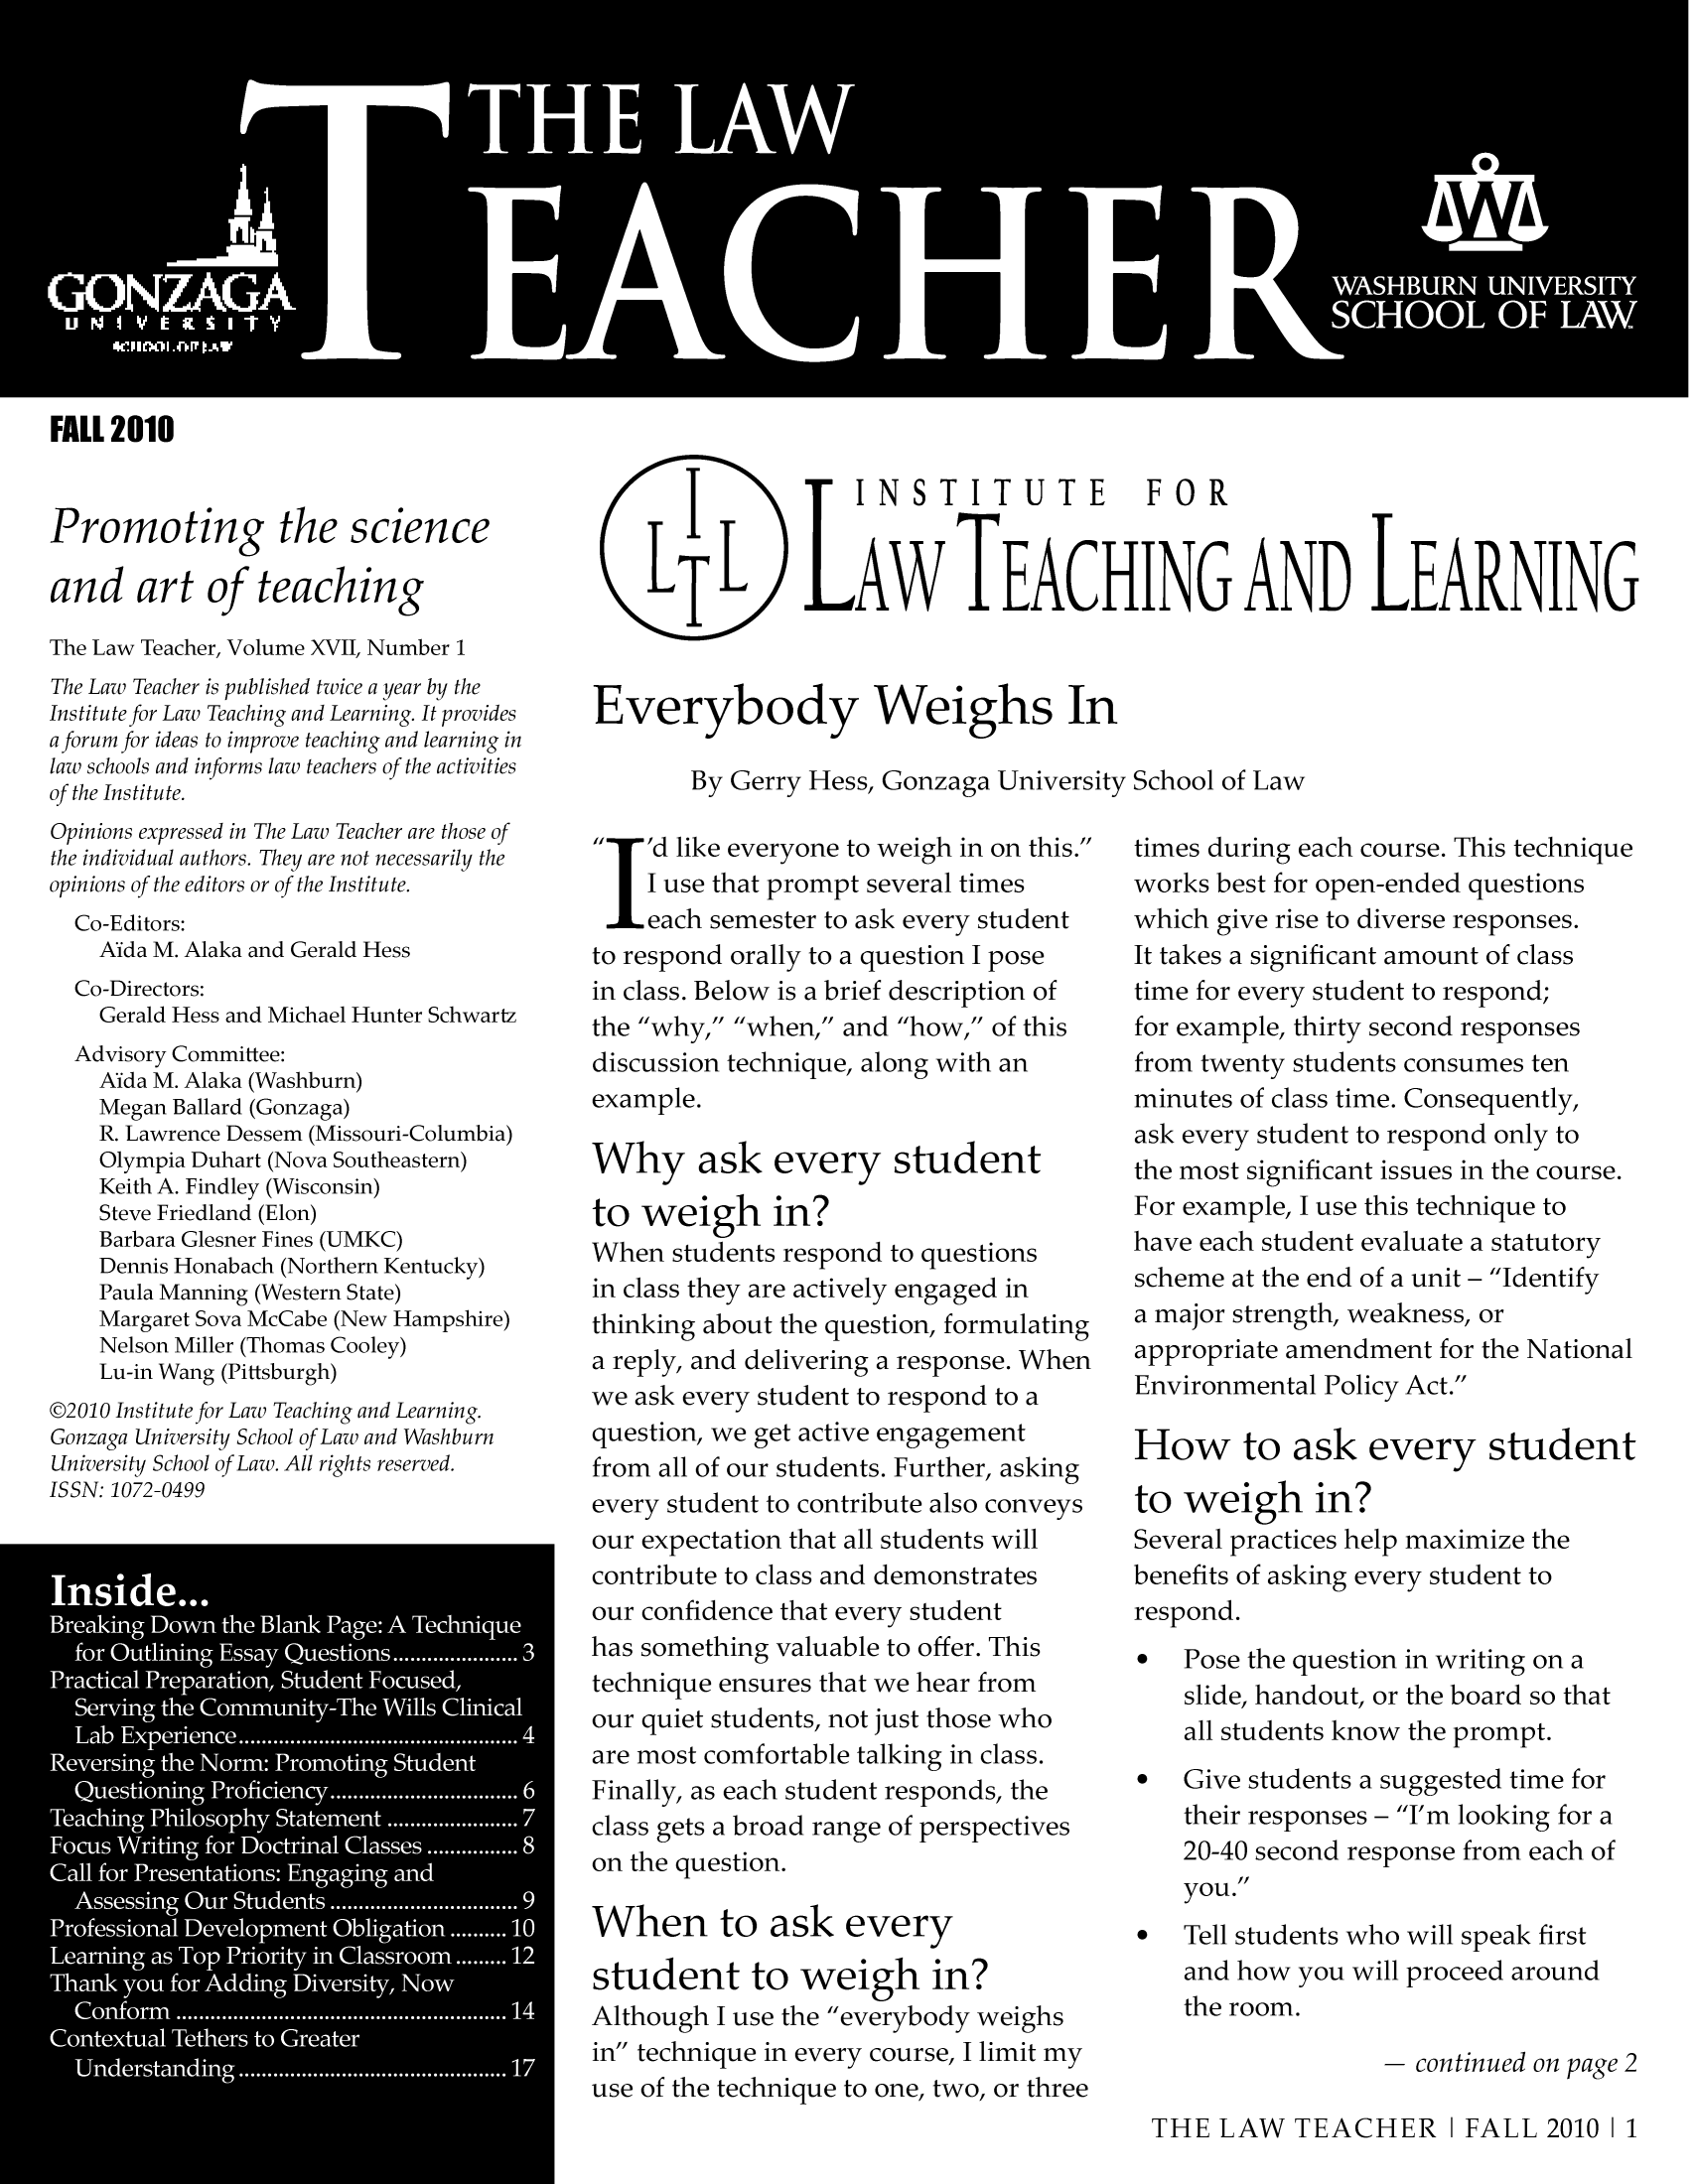 handle is hein.journals/lawteaer17 and id is 1 raw text is: FALL 2010Promoting the scienceand art of teachingThe Law Teacher, Volume XVII, Number 1The Law Teacher is published twice a year by theInstitute for Law Teaching and Learning. It providesaforum for ideas to improve teaching and learning inlaw schools and informs law teachers of the activitiesof the Institute.Opinions expressed in The Law Teacher are those ofthe individual authors. They are not necessarily theopinions of the editors or of the Institute.Co-Editors:Aida M. Alaka and Gerald HessCo-Directors:Gerald Hess and Michael Hunter SchwartzAdvisory Committee:Aida M. Alaka (Washburn)Megan Ballard (Gonzaga)R. Lawrence Dessem (Missouri-Columbia)Olympia Duhart (Nova Southeastern)Keith A. Findley (Wisconsin)Steve Friedland (Elon)Barbara Glesner Fines (UMKC)Dennis Honabach (Northern Kentucky)Paula Manning (Western State)Margaret Sova McCabe (New Hampshire)Nelson Miller (Thomas Cooley)Lu-in Wang (Pittsburgh)@2010 Institute for Law Teaching and Learning.Gonzaga University School of Law and WashburnUniversity School of Law. All rights reserved.ISSN: 1072-0499In sid e...Breaking Down the Blank Page: A Techniquefor Outlining Essay Questions ...................... 3Practical Preparation, Student Focused,Serving the Community-The Wills ClinicalLab  Experience ................................................. 4Reversing the Norm: Promoting StudentQuestioning Proficiency ................................. 6Teaching Philosophy Statement ....................... 7Focus Writing for Doctrinal Classes ................ 8Call for Presentations: Engaging andAsesin    Our Stdns ..................Professiona  Deeomn Obiato 6......1Cotxta Tethers  GreaterUnder sta d n  ...........................1I      INSTITUTE FORII(LT L LAw TEACHI.NG AND LEARqN INGEverybody Weighs InBy Gerry Hess, Gonzaga University School of LawT 'd like everyone to weigh in on this.I use that prompt several timeseach semester to ask every studentto respond orally to a question I posein class. Below is a brief description ofthe why, when, and how, of thisdiscussion technique, along with anexample.Why ask every studentto weigh in?When students respond to questionsin class they are actively engaged inthinking about the question, formulatinga reply, and delivering a response. Whenwe ask every student to respond to aquestion, we get active engagementfrom all of our students. Further, askingevery student to contribute also conveysour expectation that all students willcontribute to class and demonstratesour confidence that every studenthas something valuable to offer. Thistechnique ensures that we hear fromour quiet students, not just those whoare most comfortable talking in class.Finally, as each student responds, theclass gets a broad range of perspectiveson the question.When to ask everystudent to weigh in?Although I use the everybody weighsin technique in every course, I limit myuse of the technique to one, two, or threetimes during each course. This techniqueworks best for open-ended questionswhich give rise to diverse responses.It takes a significant amount of classtime for every student to respond;for example, thirty second responsesfrom twenty students consumes tenminutes of class time. Consequently,ask every student to respond only tothe most significant issues in the course.For example, I use this technique tohave each student evaluate a statutoryscheme at the end of a unit - Identifya major strength, weakness, orappropriate amendment for the NationalEnvironmental Policy Act.How to ask every studentto weigh in?Several practices help maximize thebenefits of asking every student torespond.* Pose the question in writing on aslide, handout, or the board so thatall students know the prompt.*  Give students a suggested time fortheir responses - I'm looking for a20-40 second response from each ofyou.*  Tell students who will speak firstand how you will proceed aroundthe room.- continued on page 2THE LAW TEACHER I FALL 2010 I 1